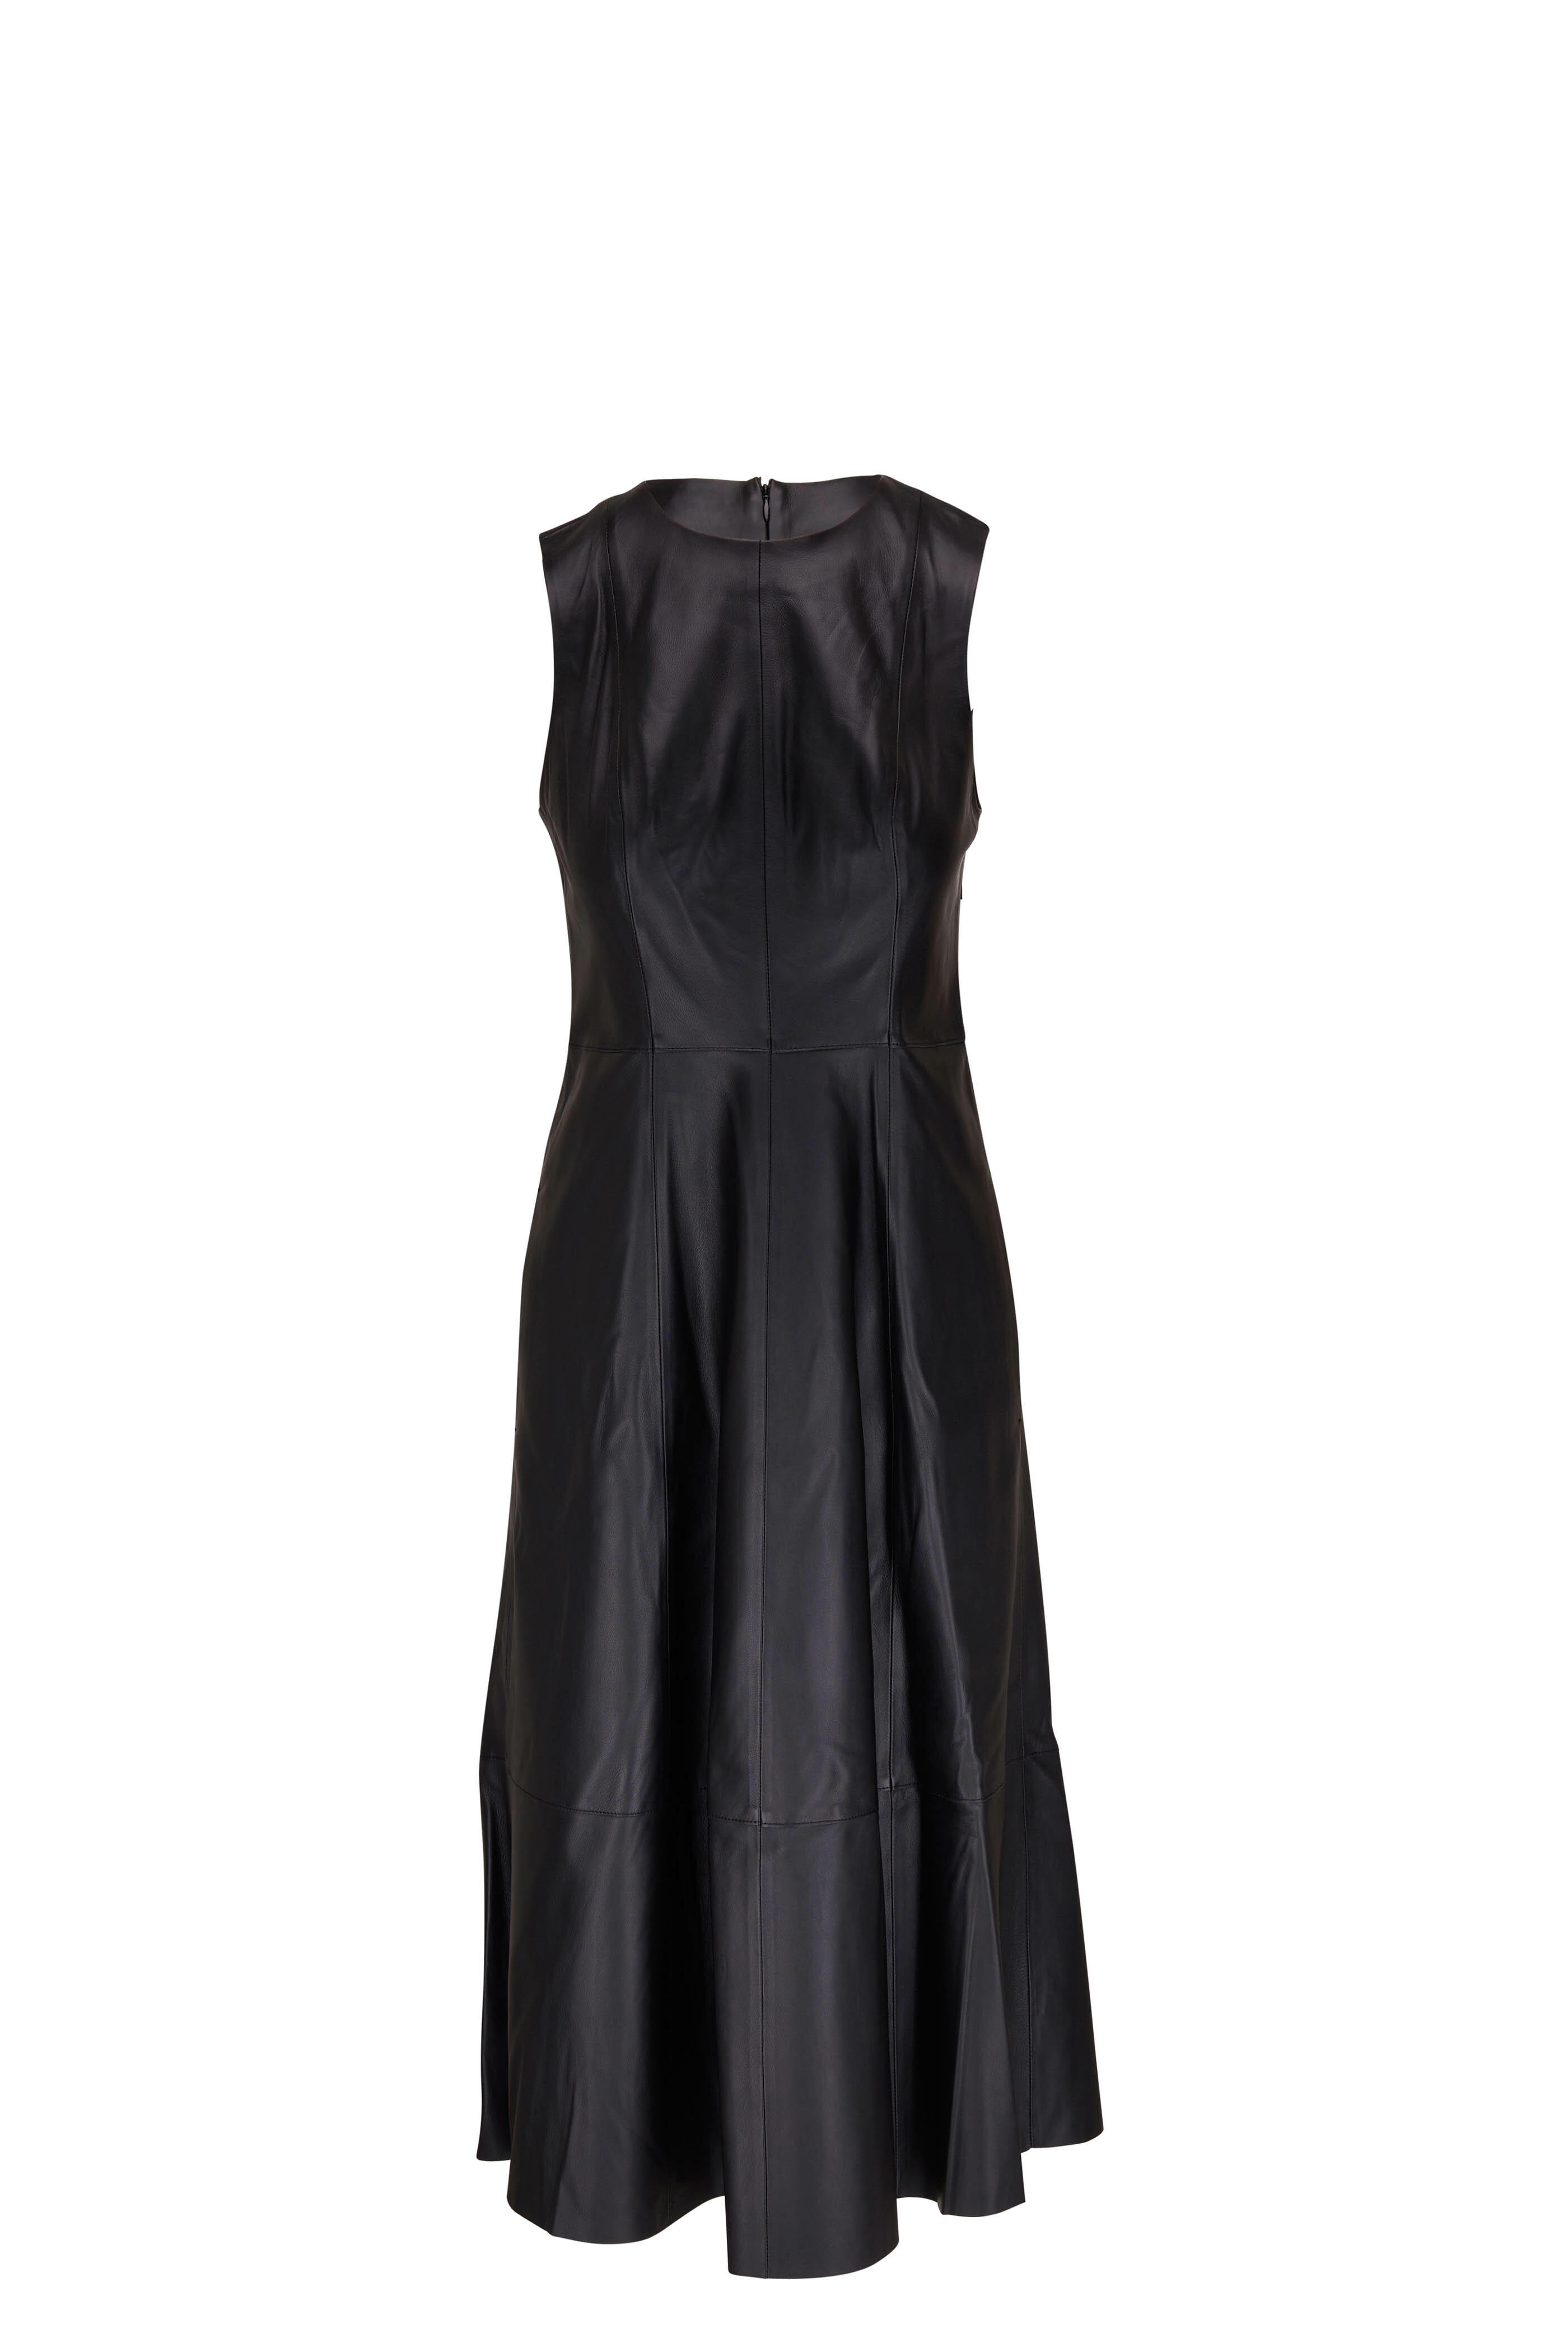 Vince - Black Sleeveless Leather Dress | Mitchell Stores